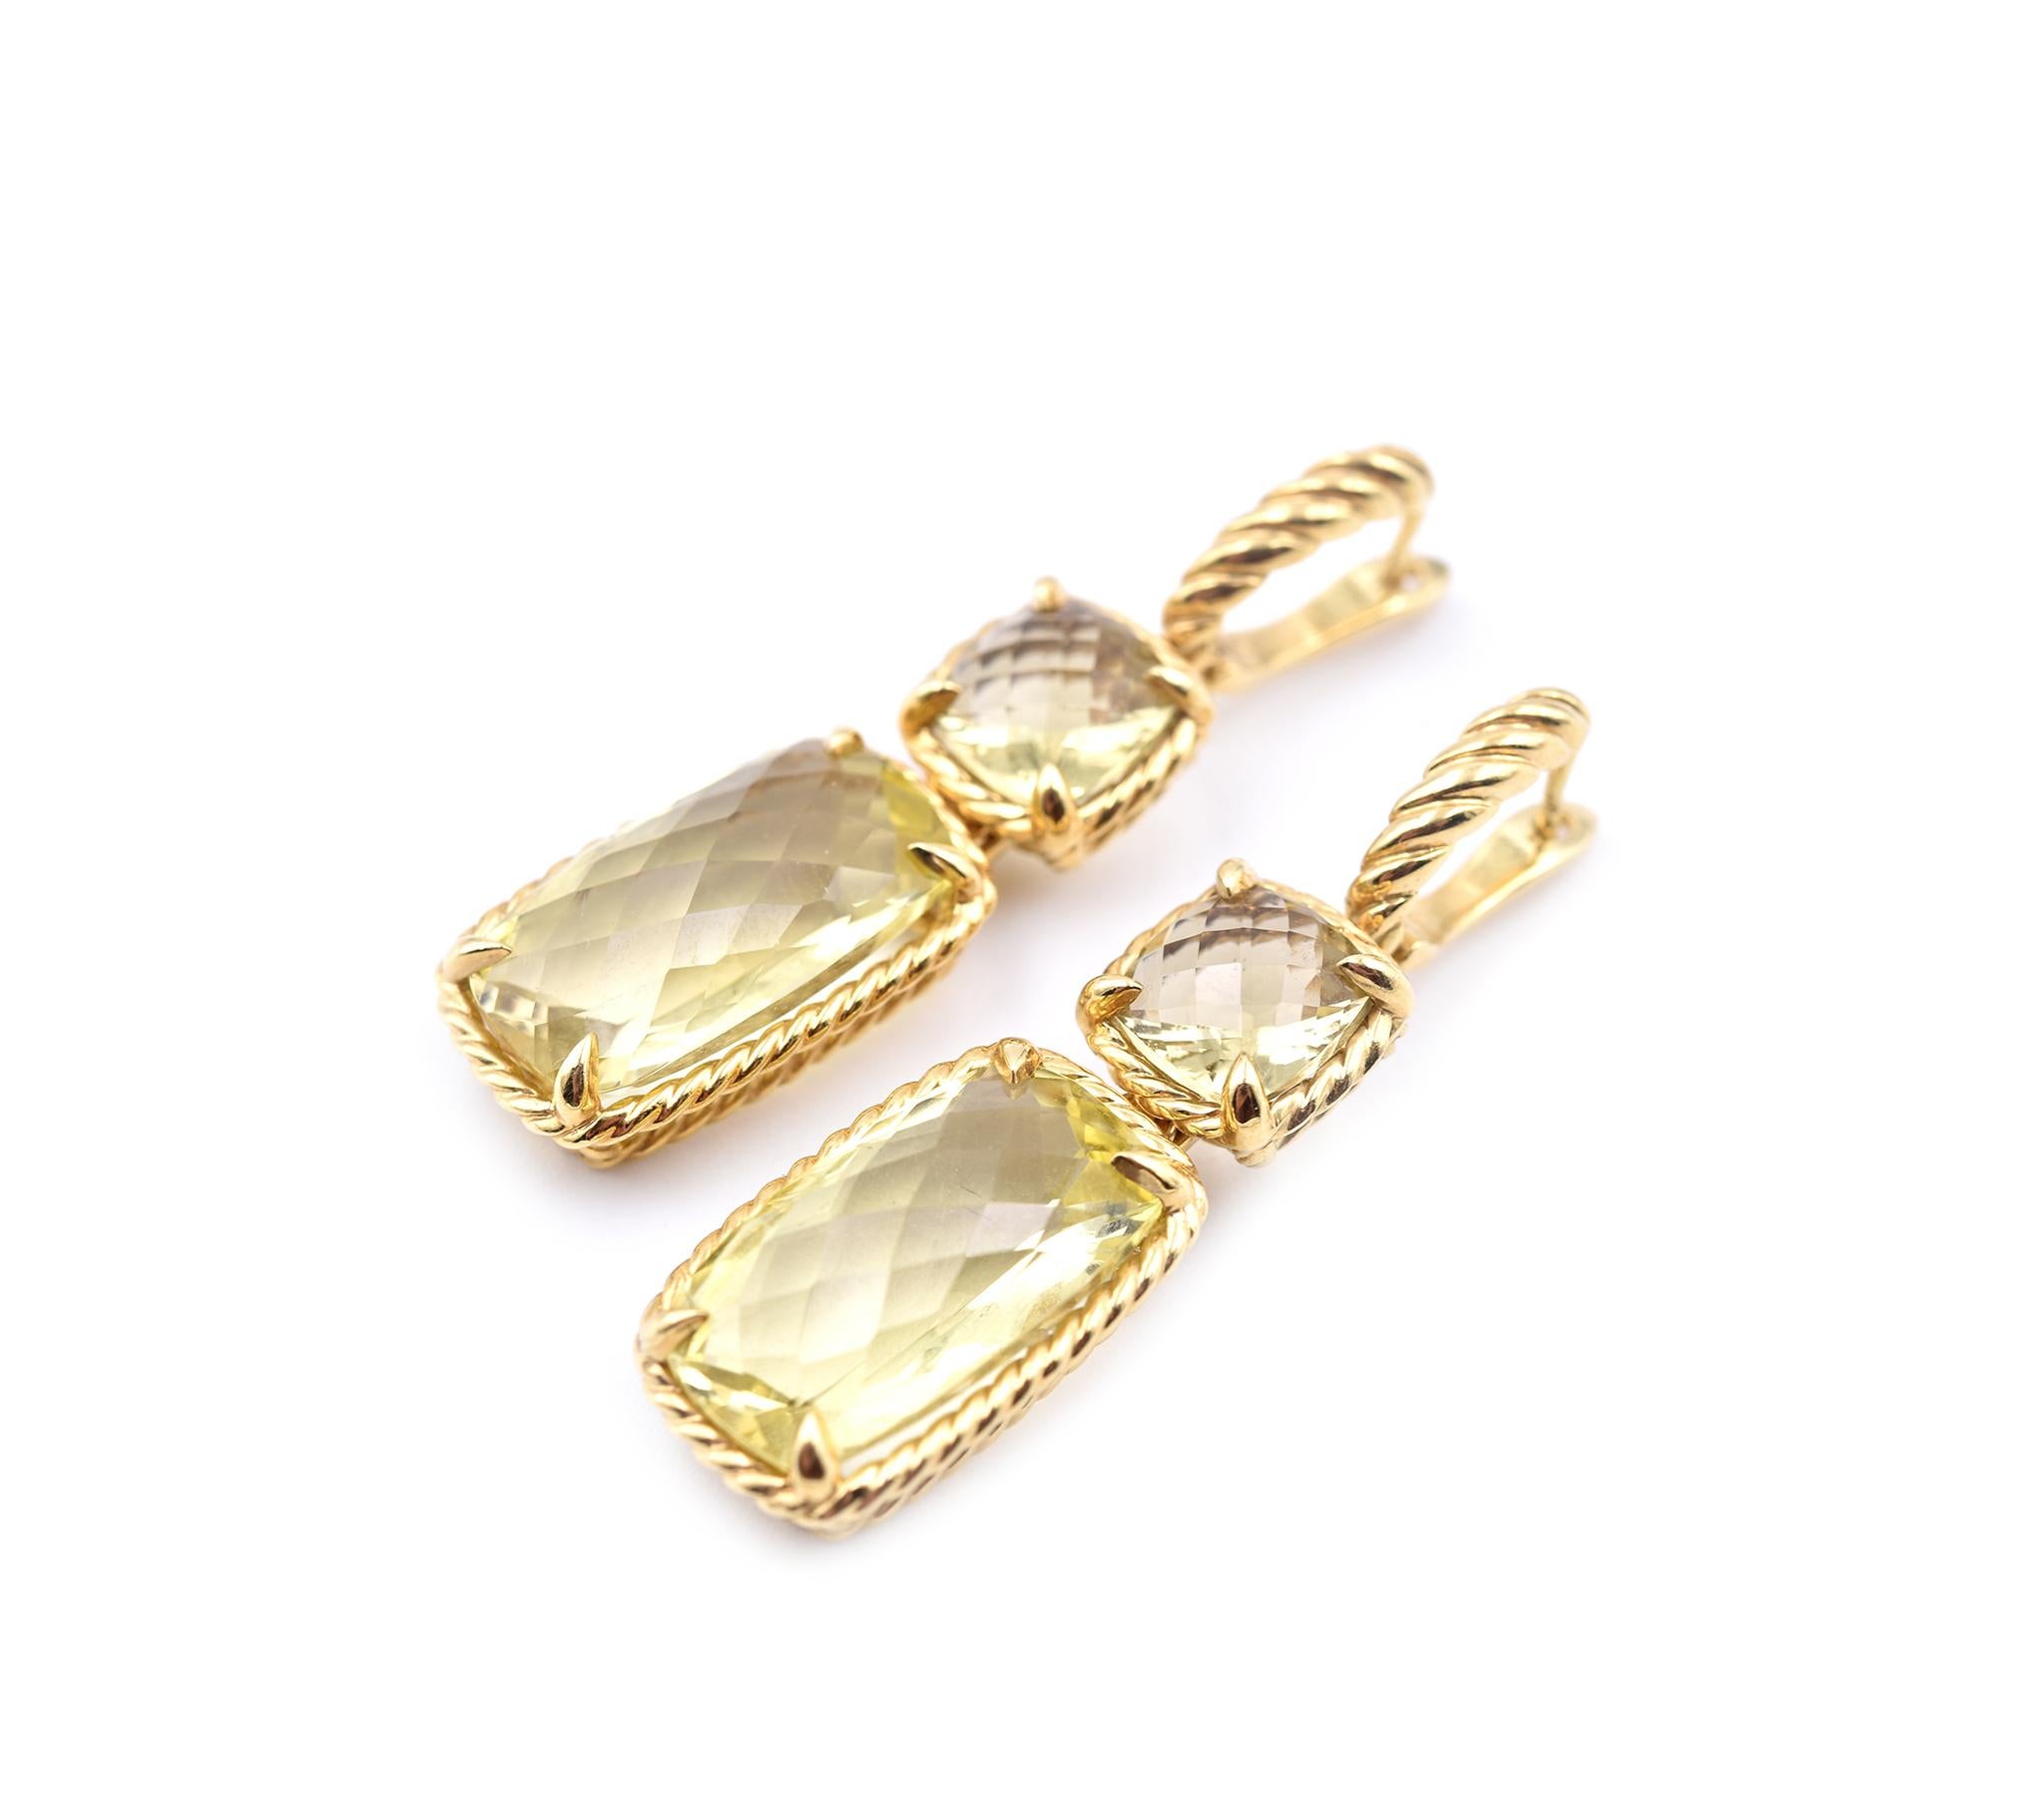 Designer: David Yurman
Material: 18k yellow gold
Dimensions: earrings are 1 ¾ inches long and 12.60mm wide
Fastenings: lever back
Weight: 15.32 grams
